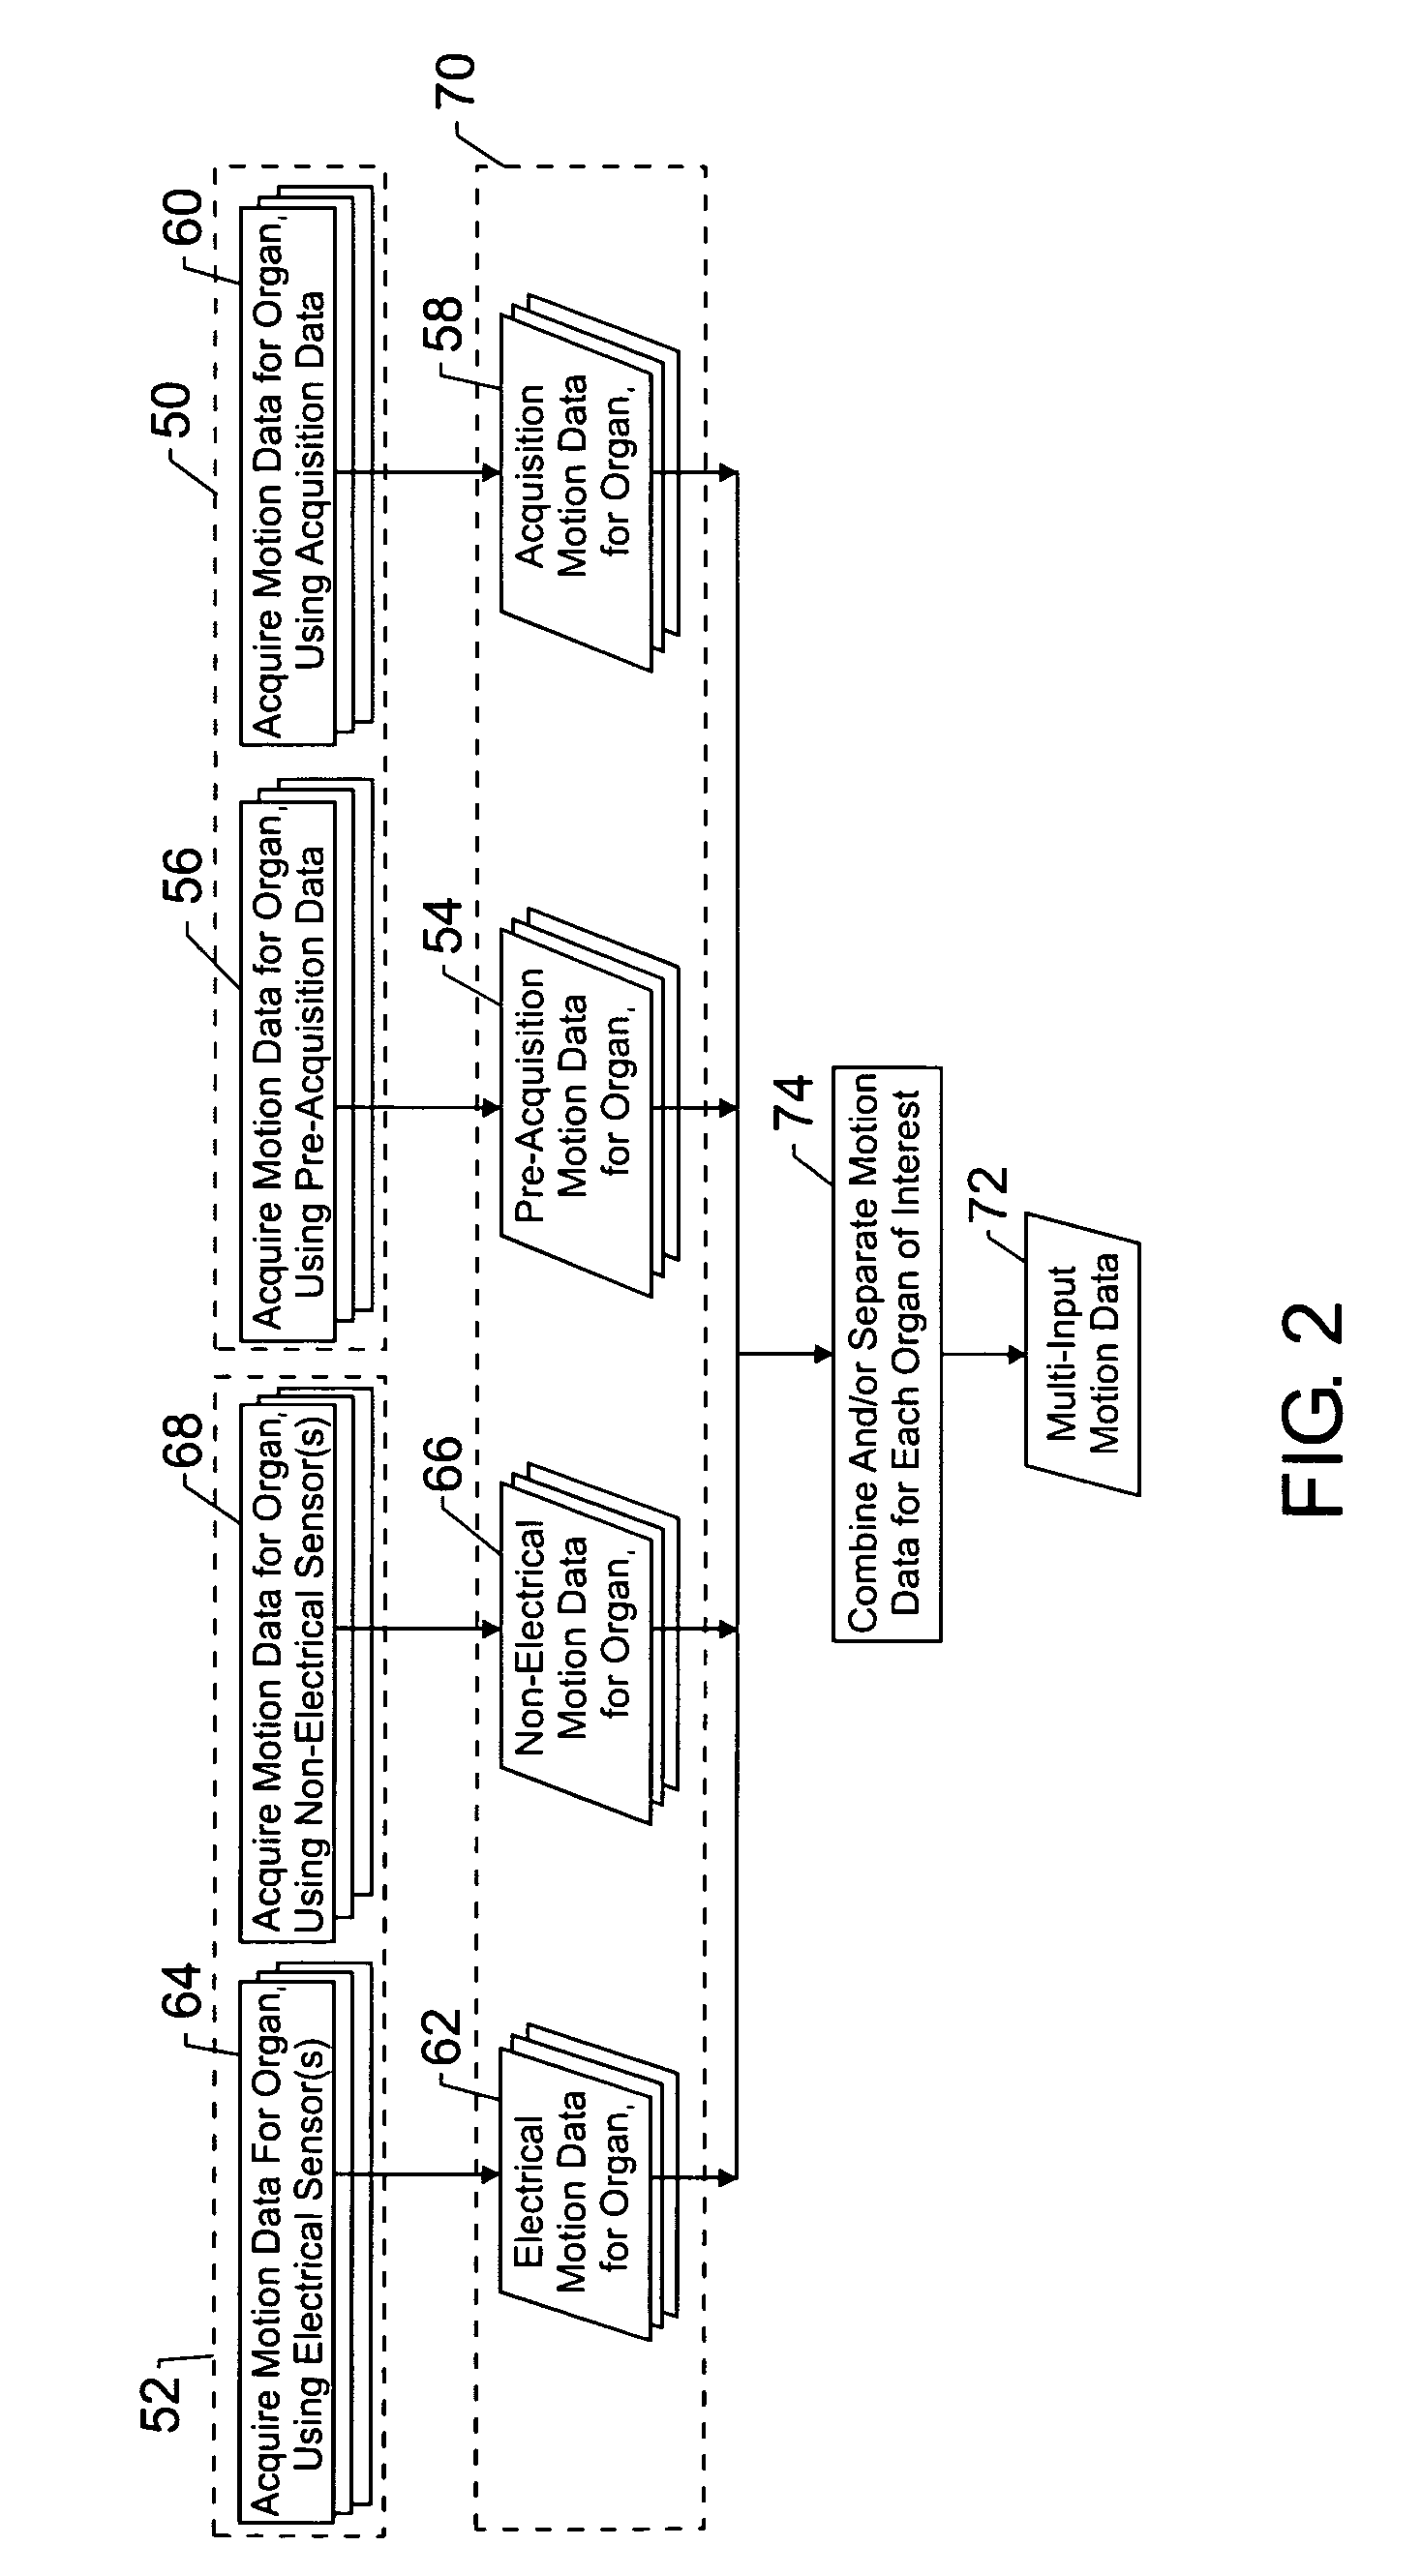 Method and system for retrospective gating using multiple inputs